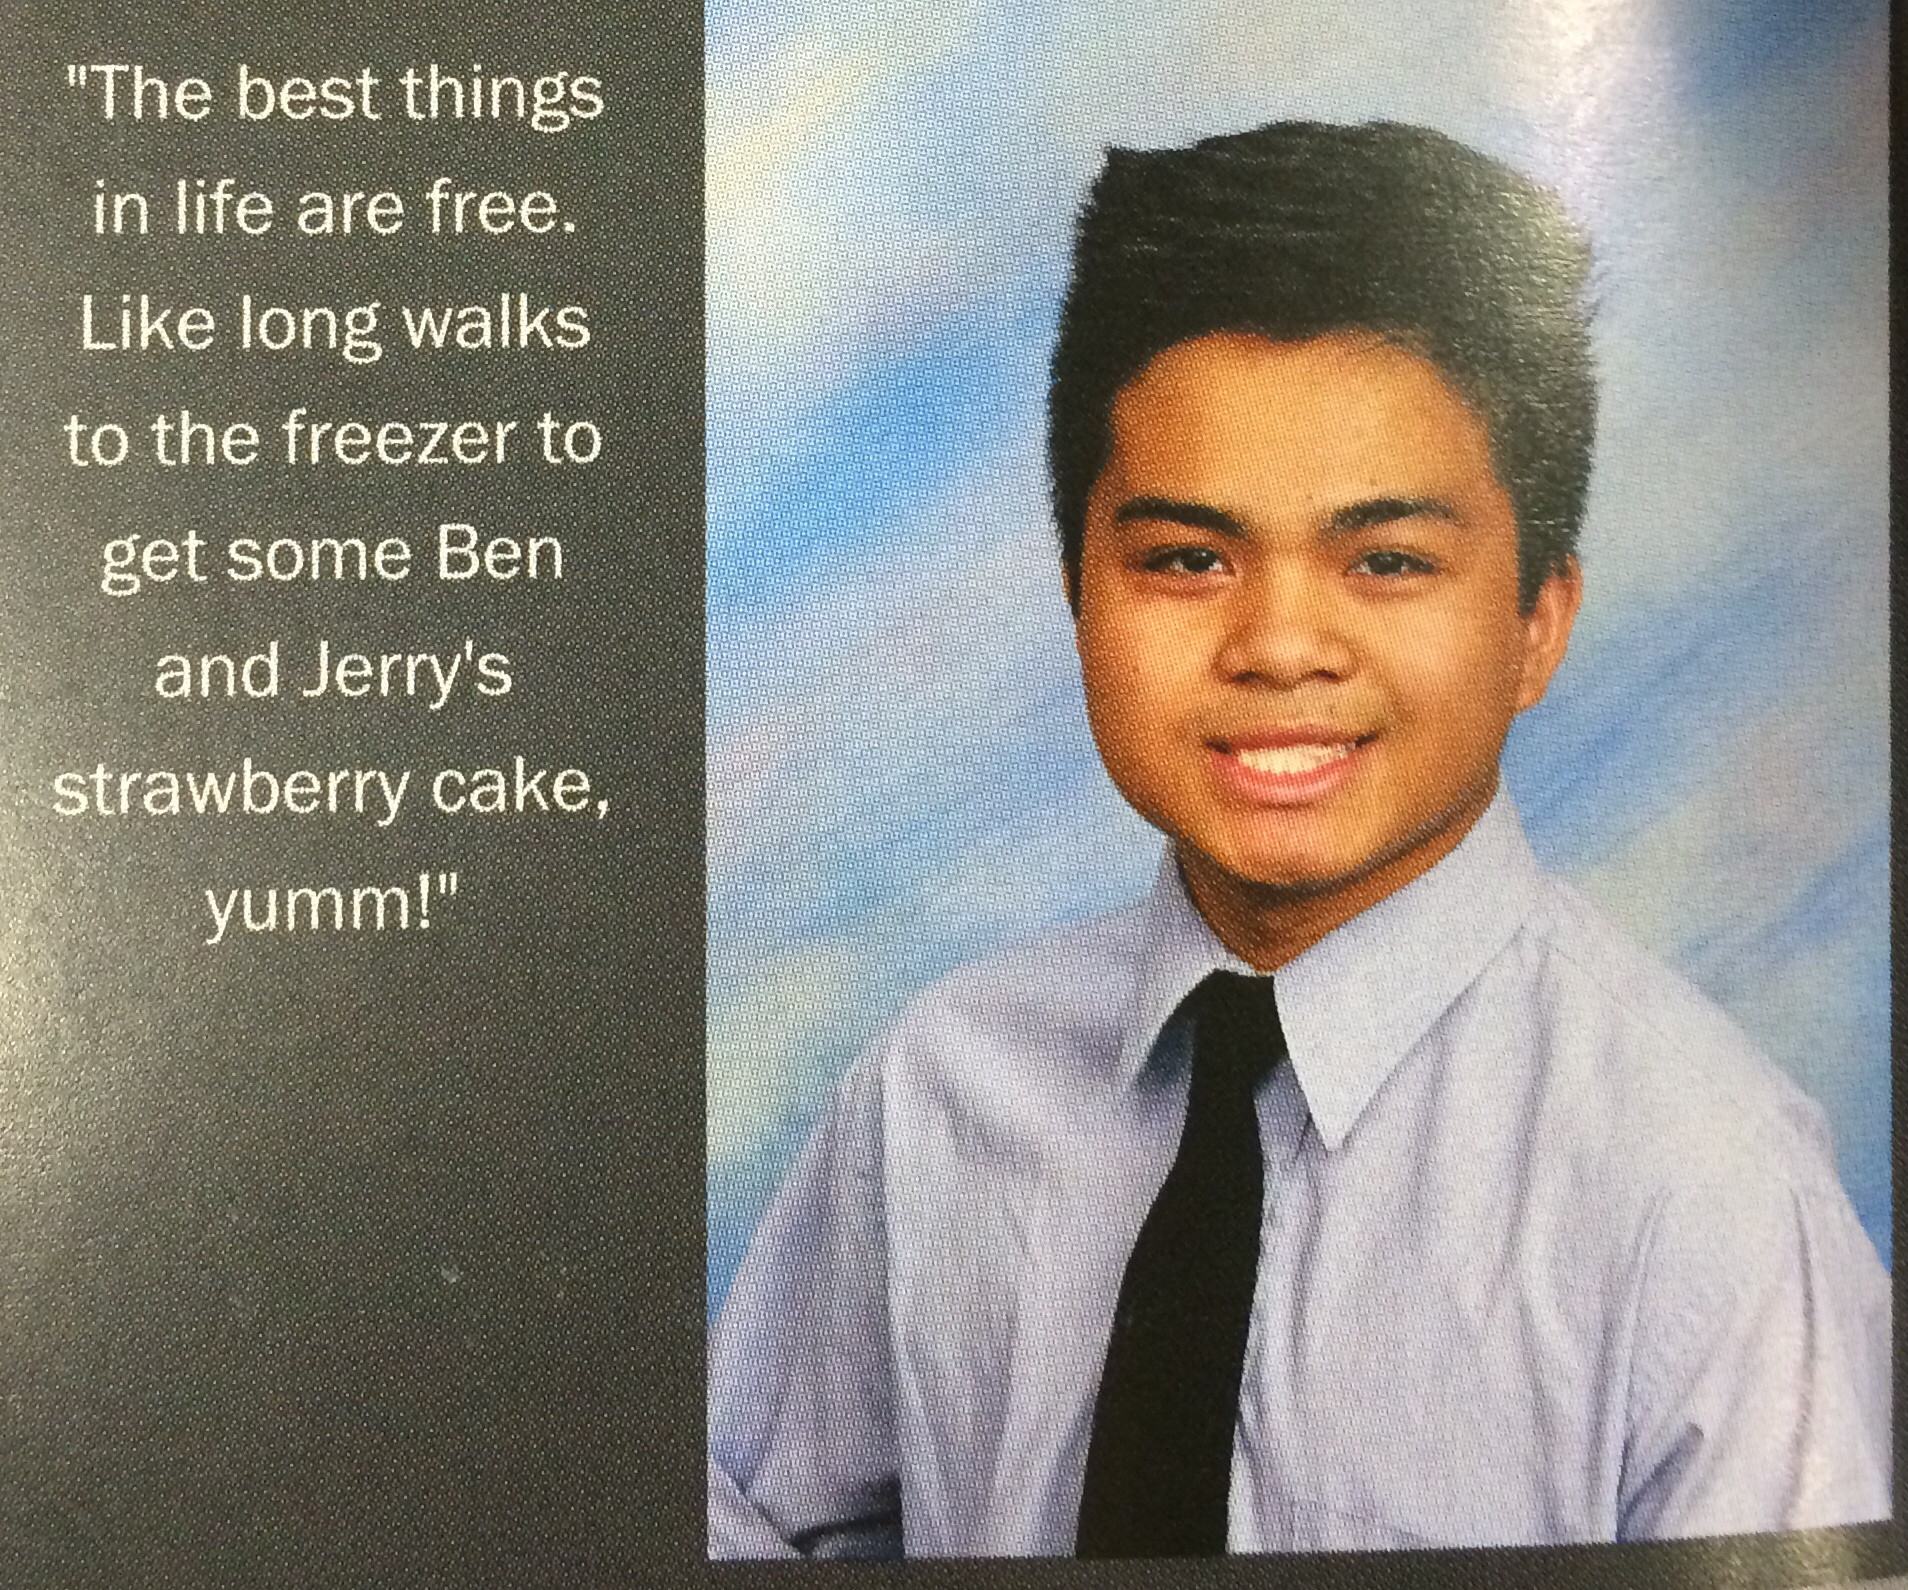 32 Funny Yearbook Photos and Quotes (2014 Edition) | Pleated Jeans